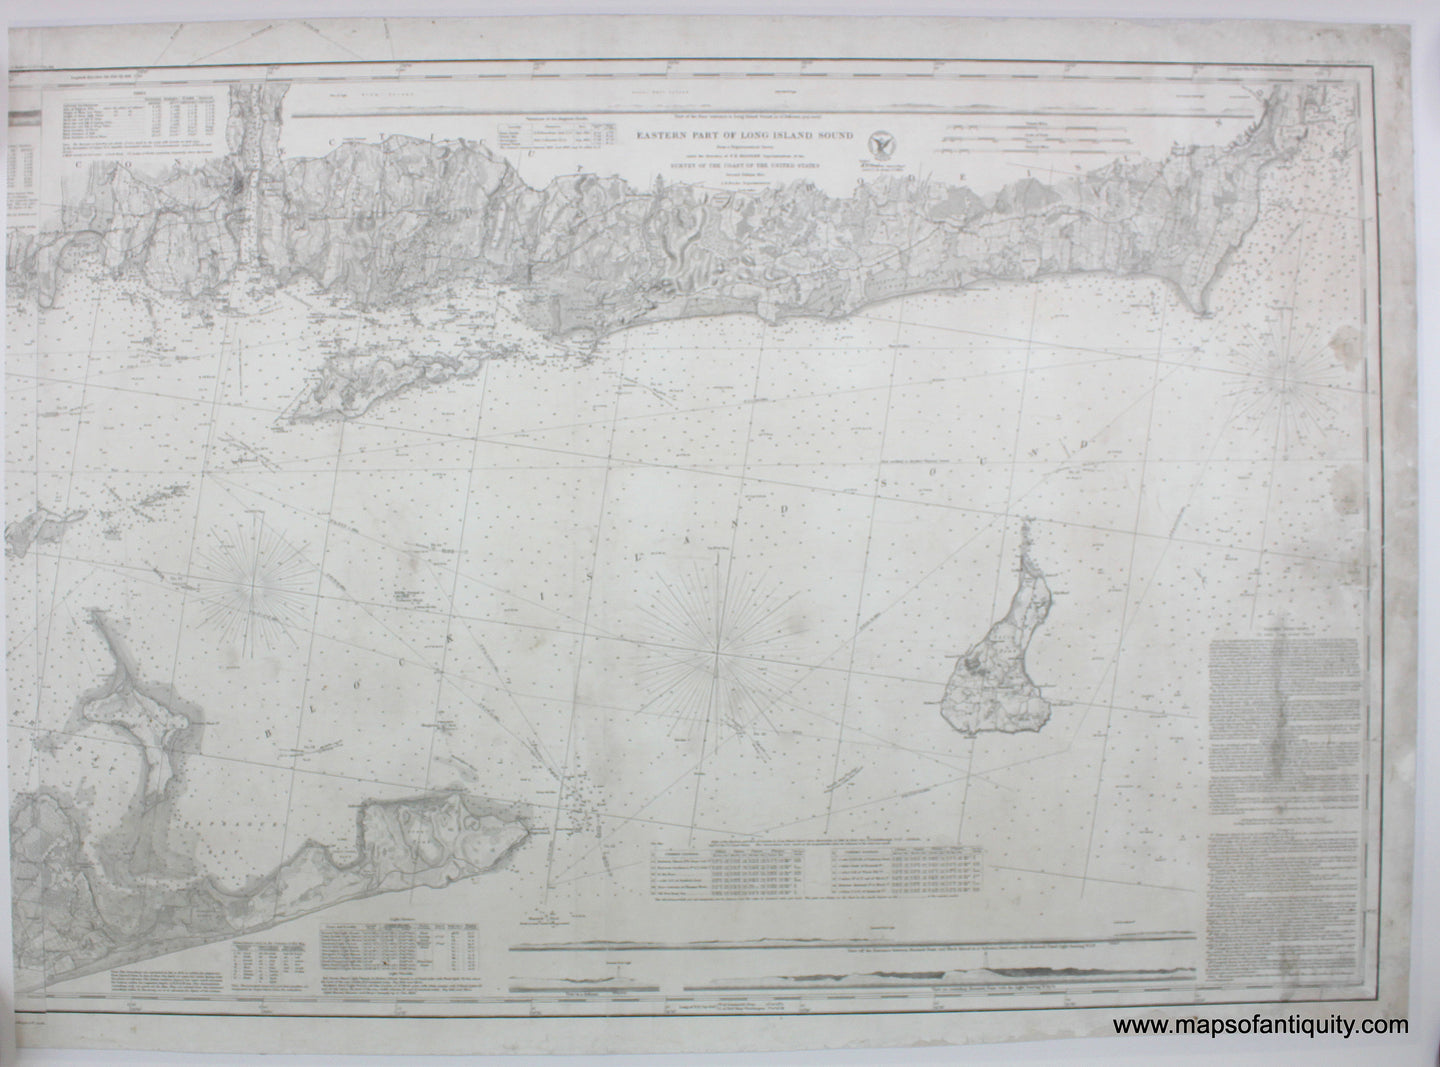 Reproduction-Eastern-Part-of-Long-Island-Sound---Reproduction-Reproductions---Reproduction-Maps-Of-Antiquity